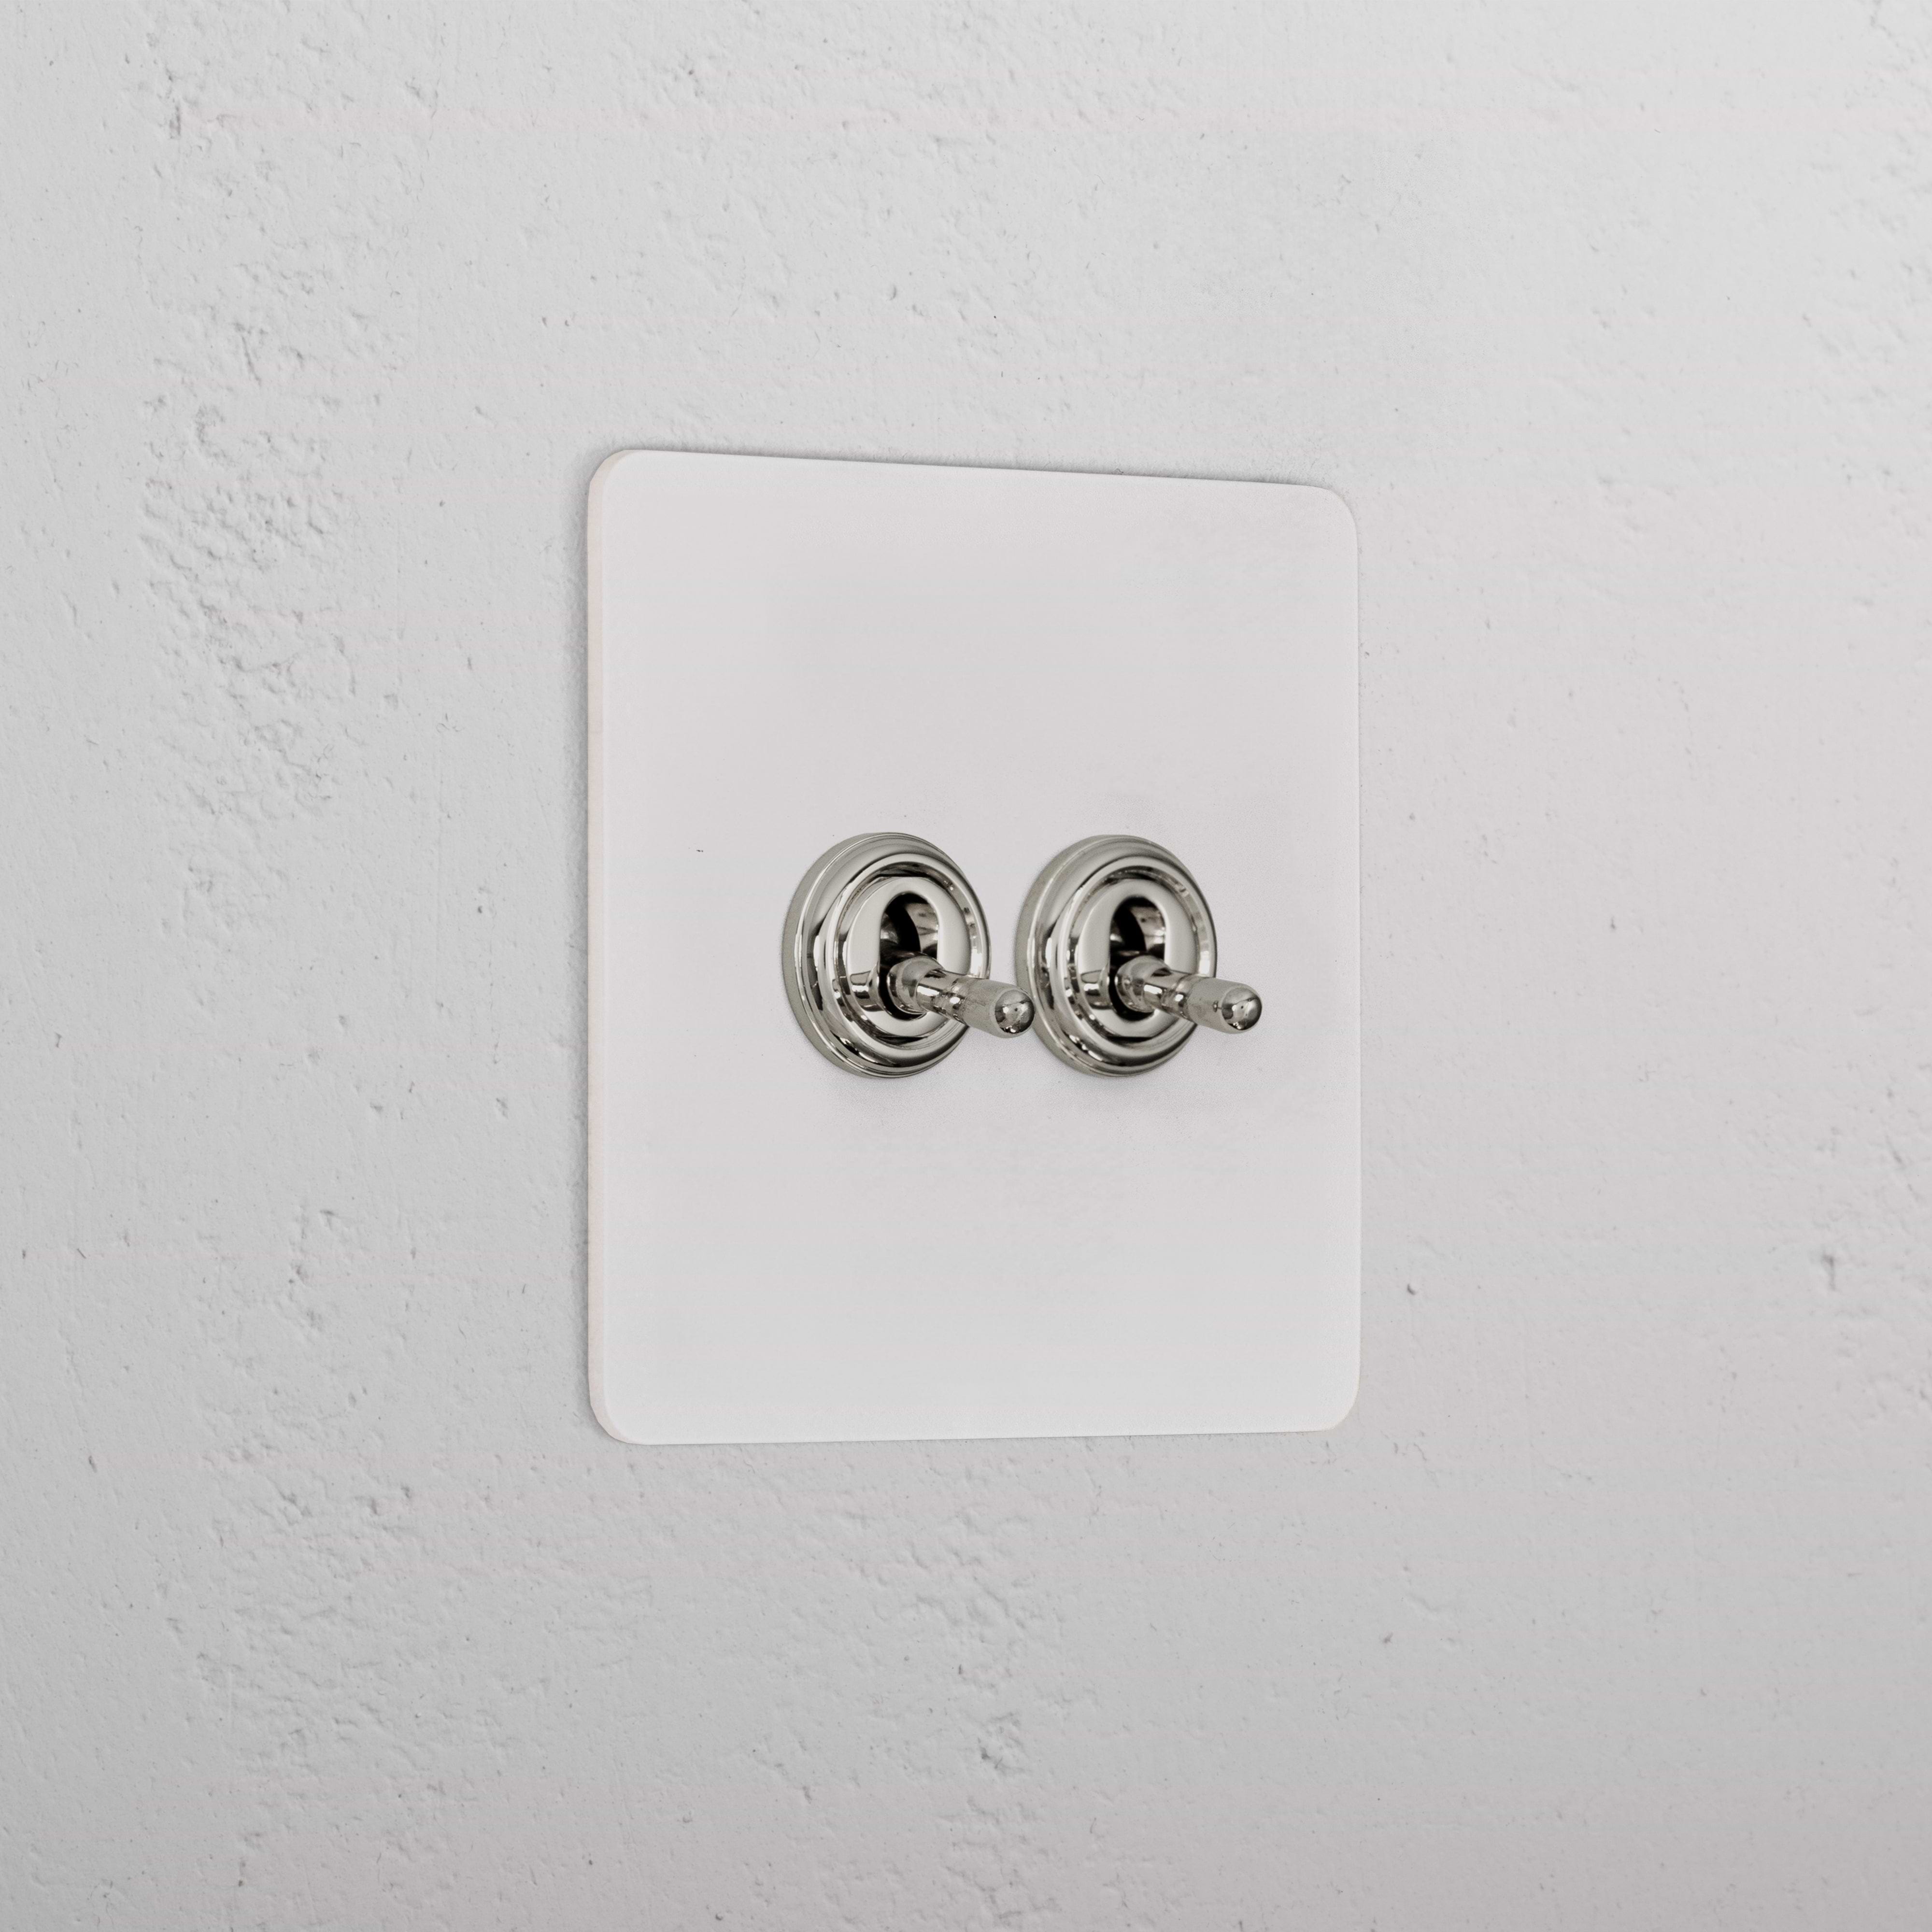 2G Two Way Toggle Switch - Paintable Polished Nickel